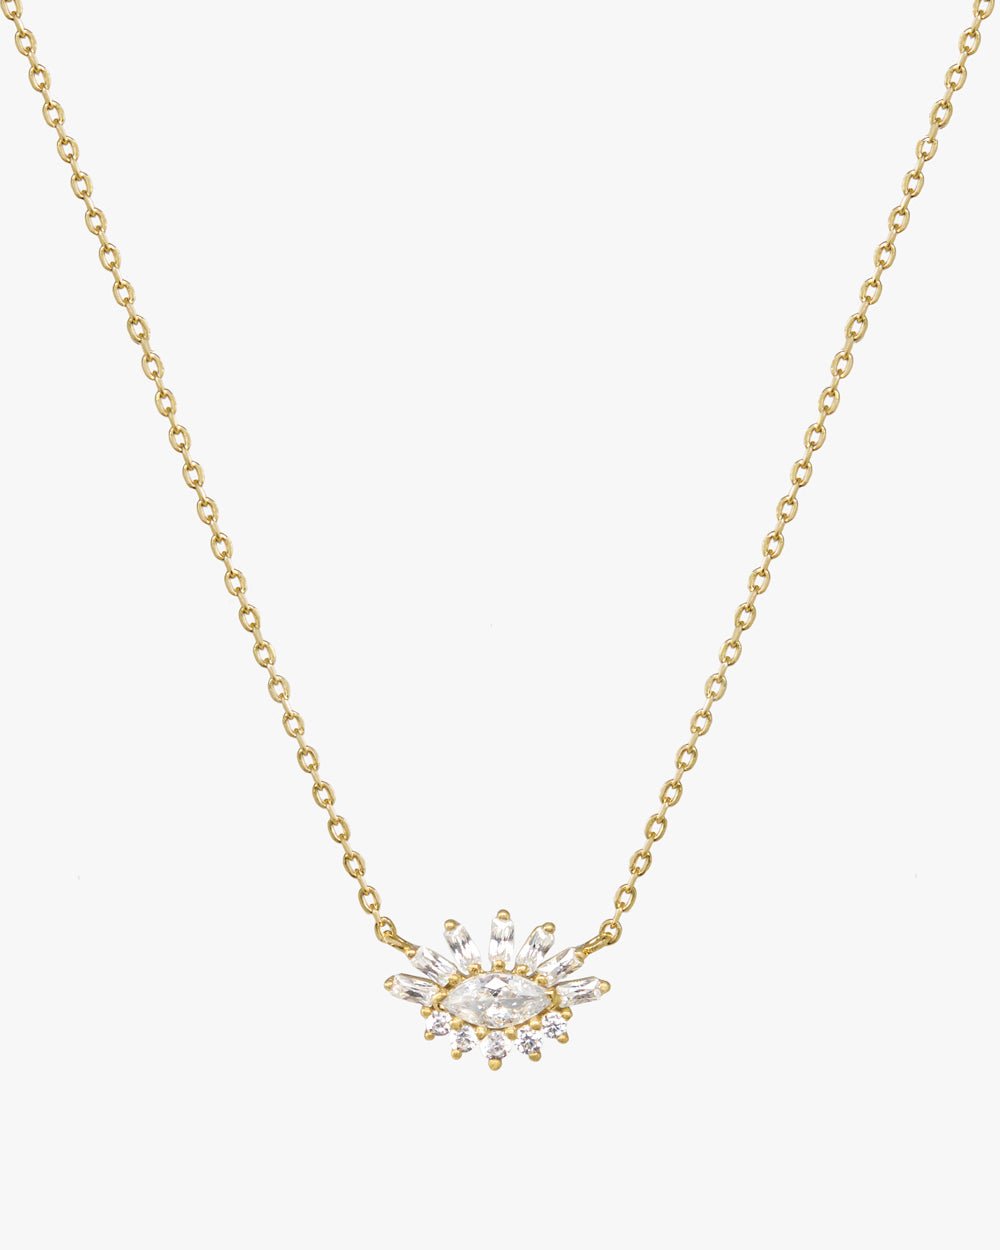 BECCA MARQUISE PENDANT NECKLACE - Shop Cupcakes and Cashmere